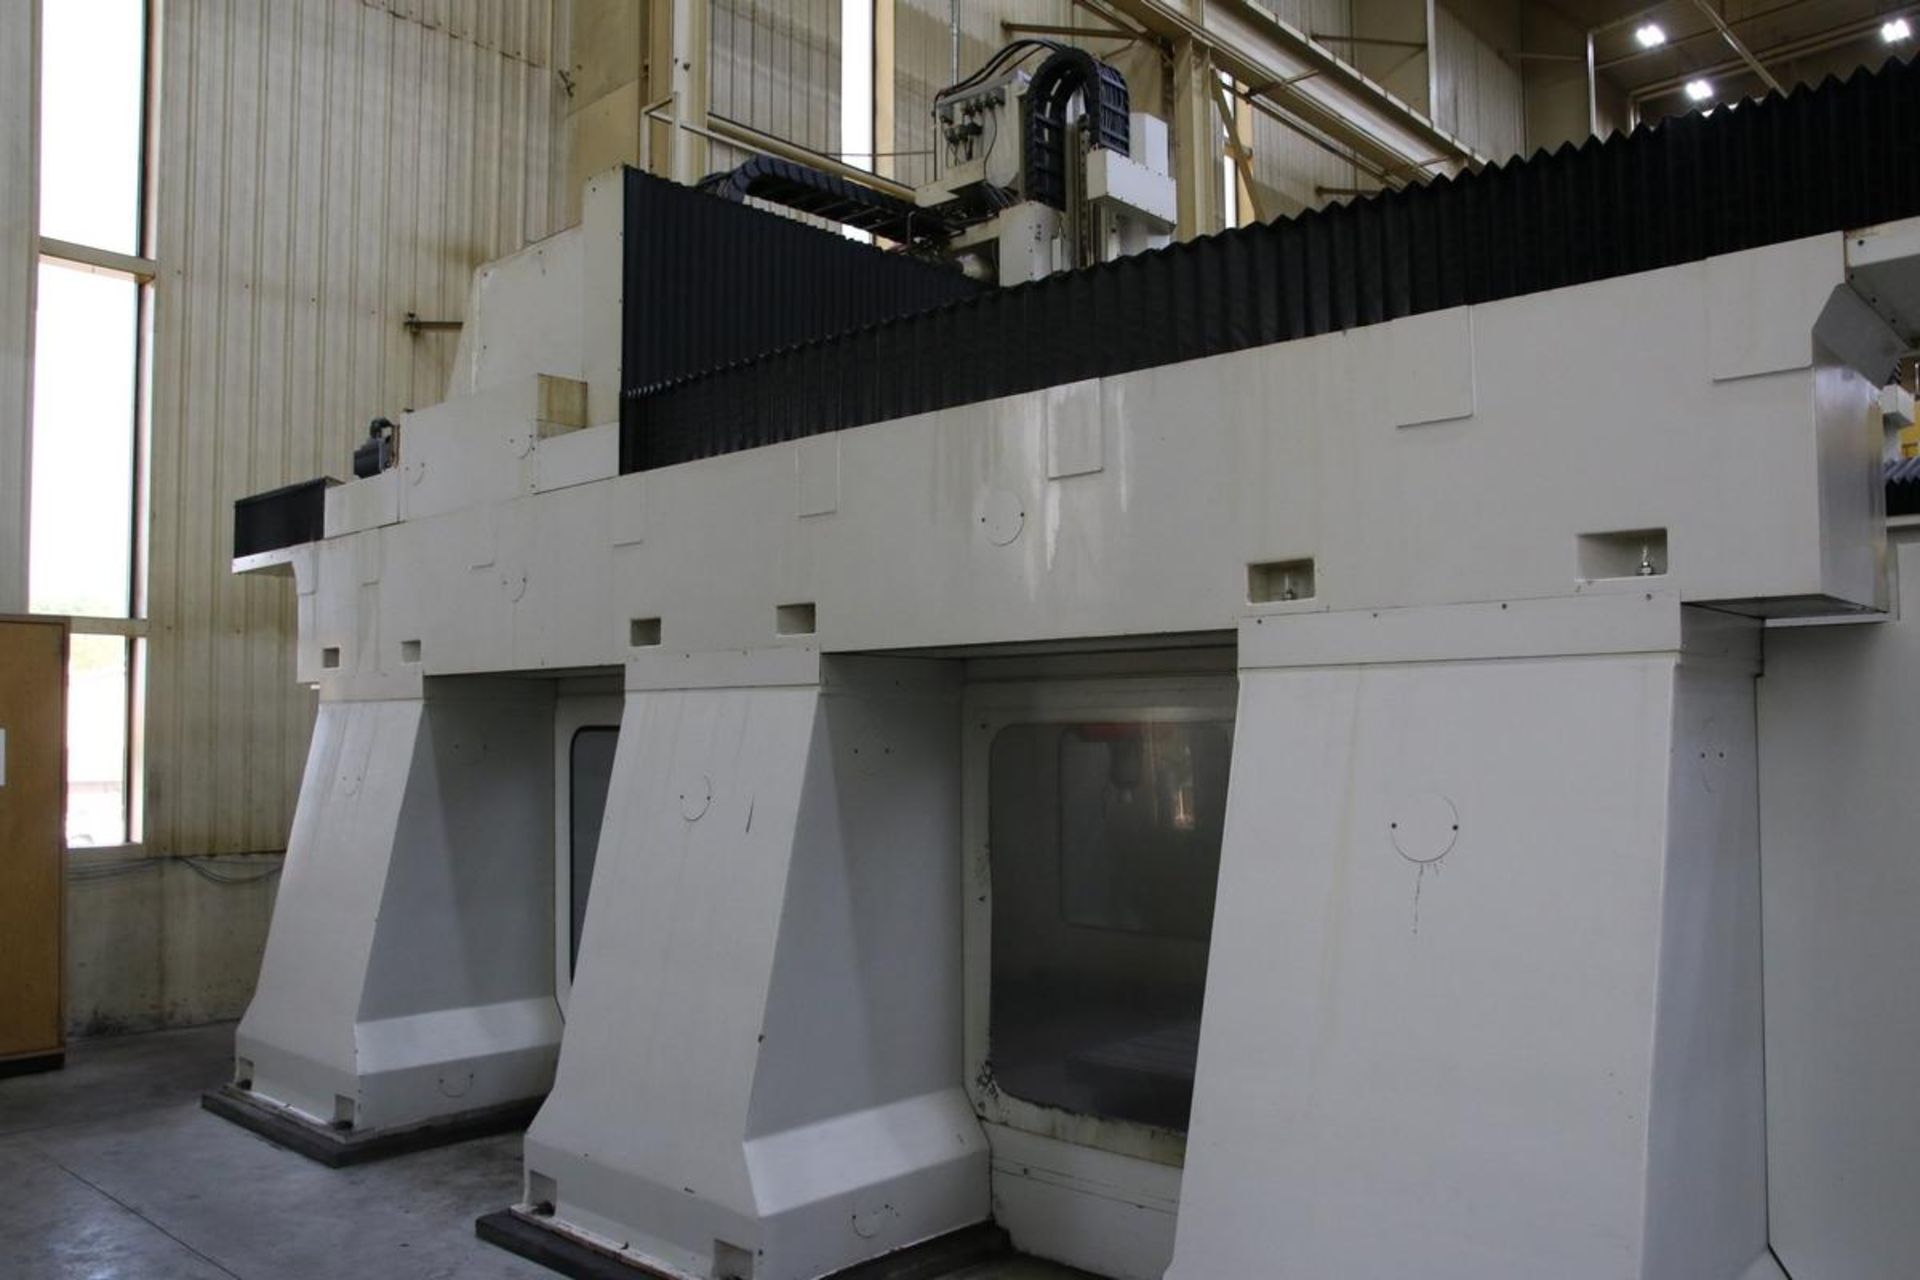 1995 Droop & Rein FOG 2500 HS11/13NW 5-Axis CNC High Speed Gantry Mill - Image 3 of 32